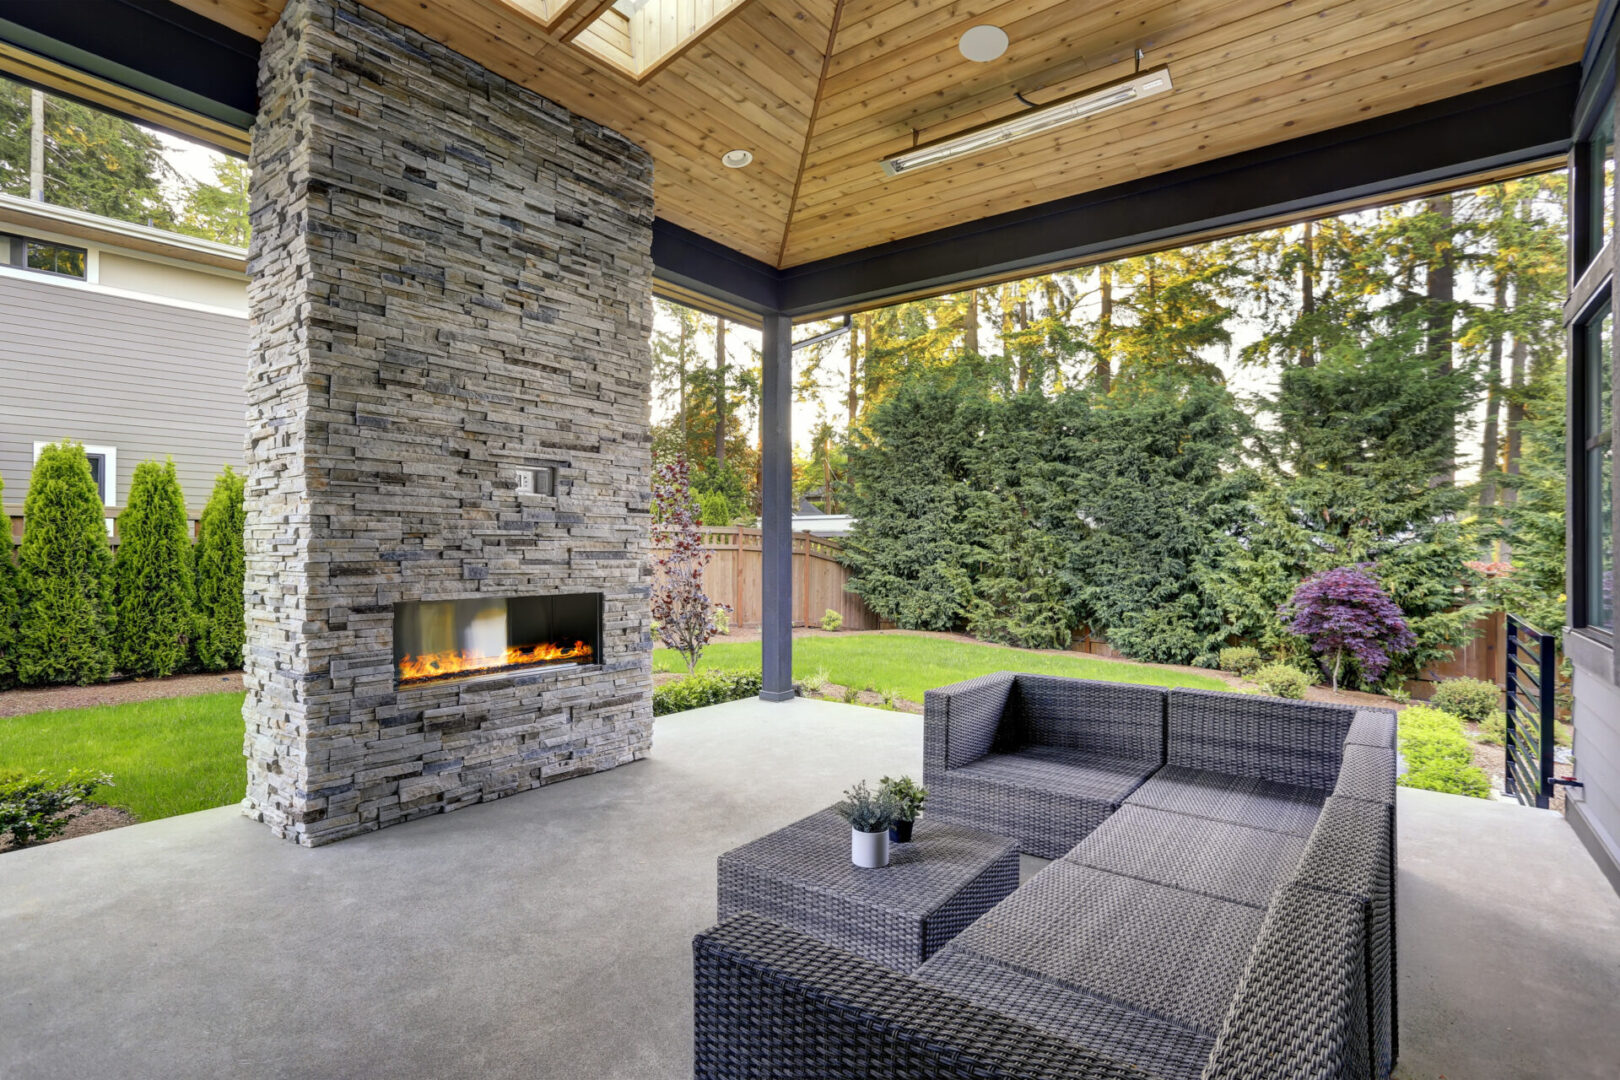 A patio with a couch and fireplace in it